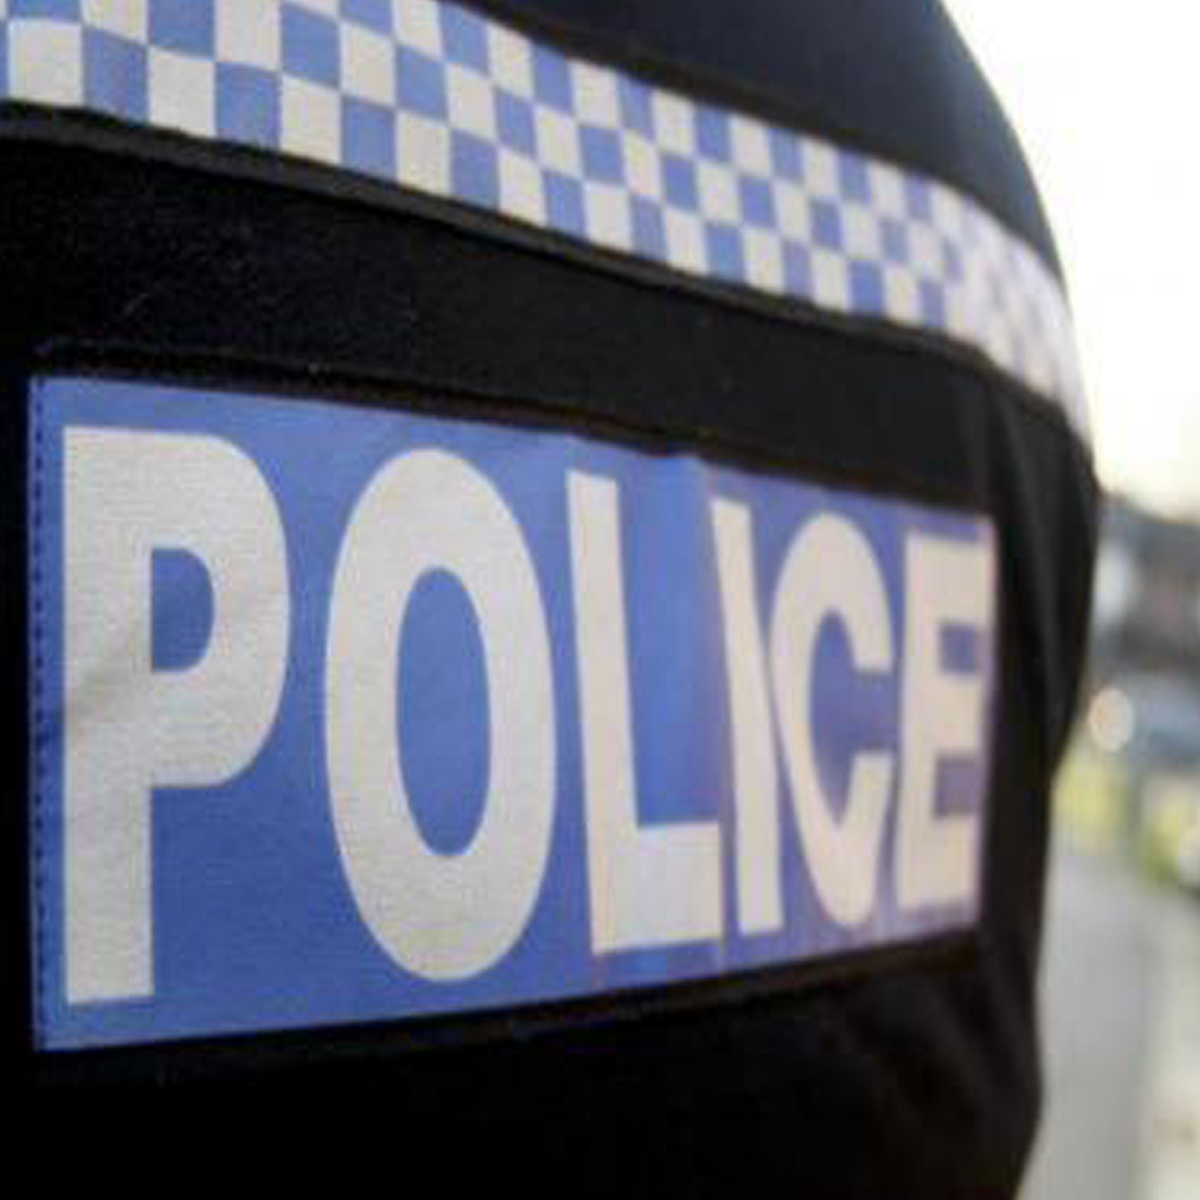 Helicopter crew join search after vehicle makes off from police - Bradford Telegraph and Argus